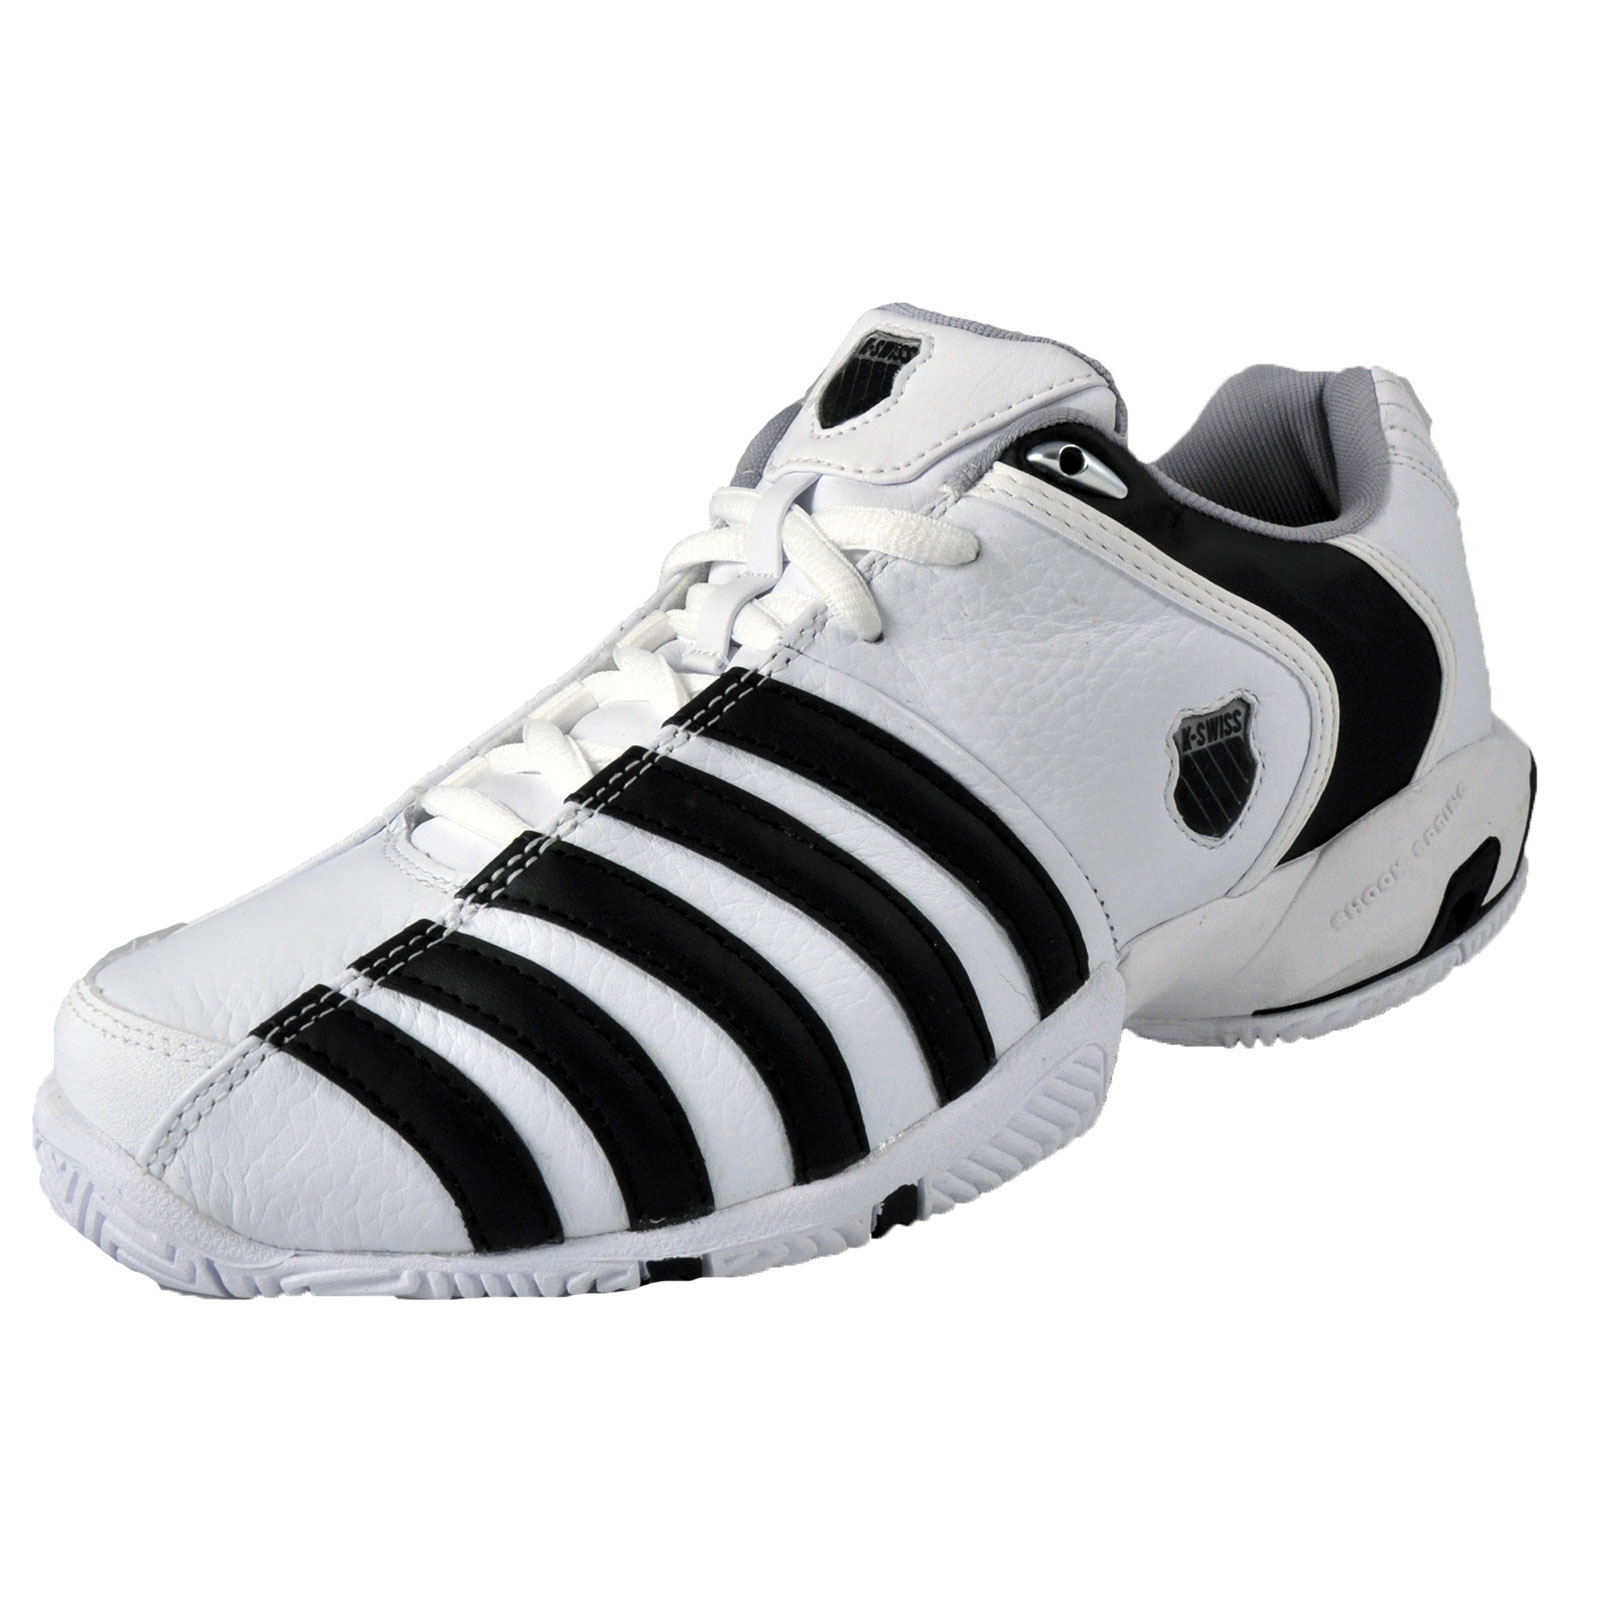 K Swiss Mens Leather Cross Training Shoes (Wht) * AUTHENTIC * | eBay